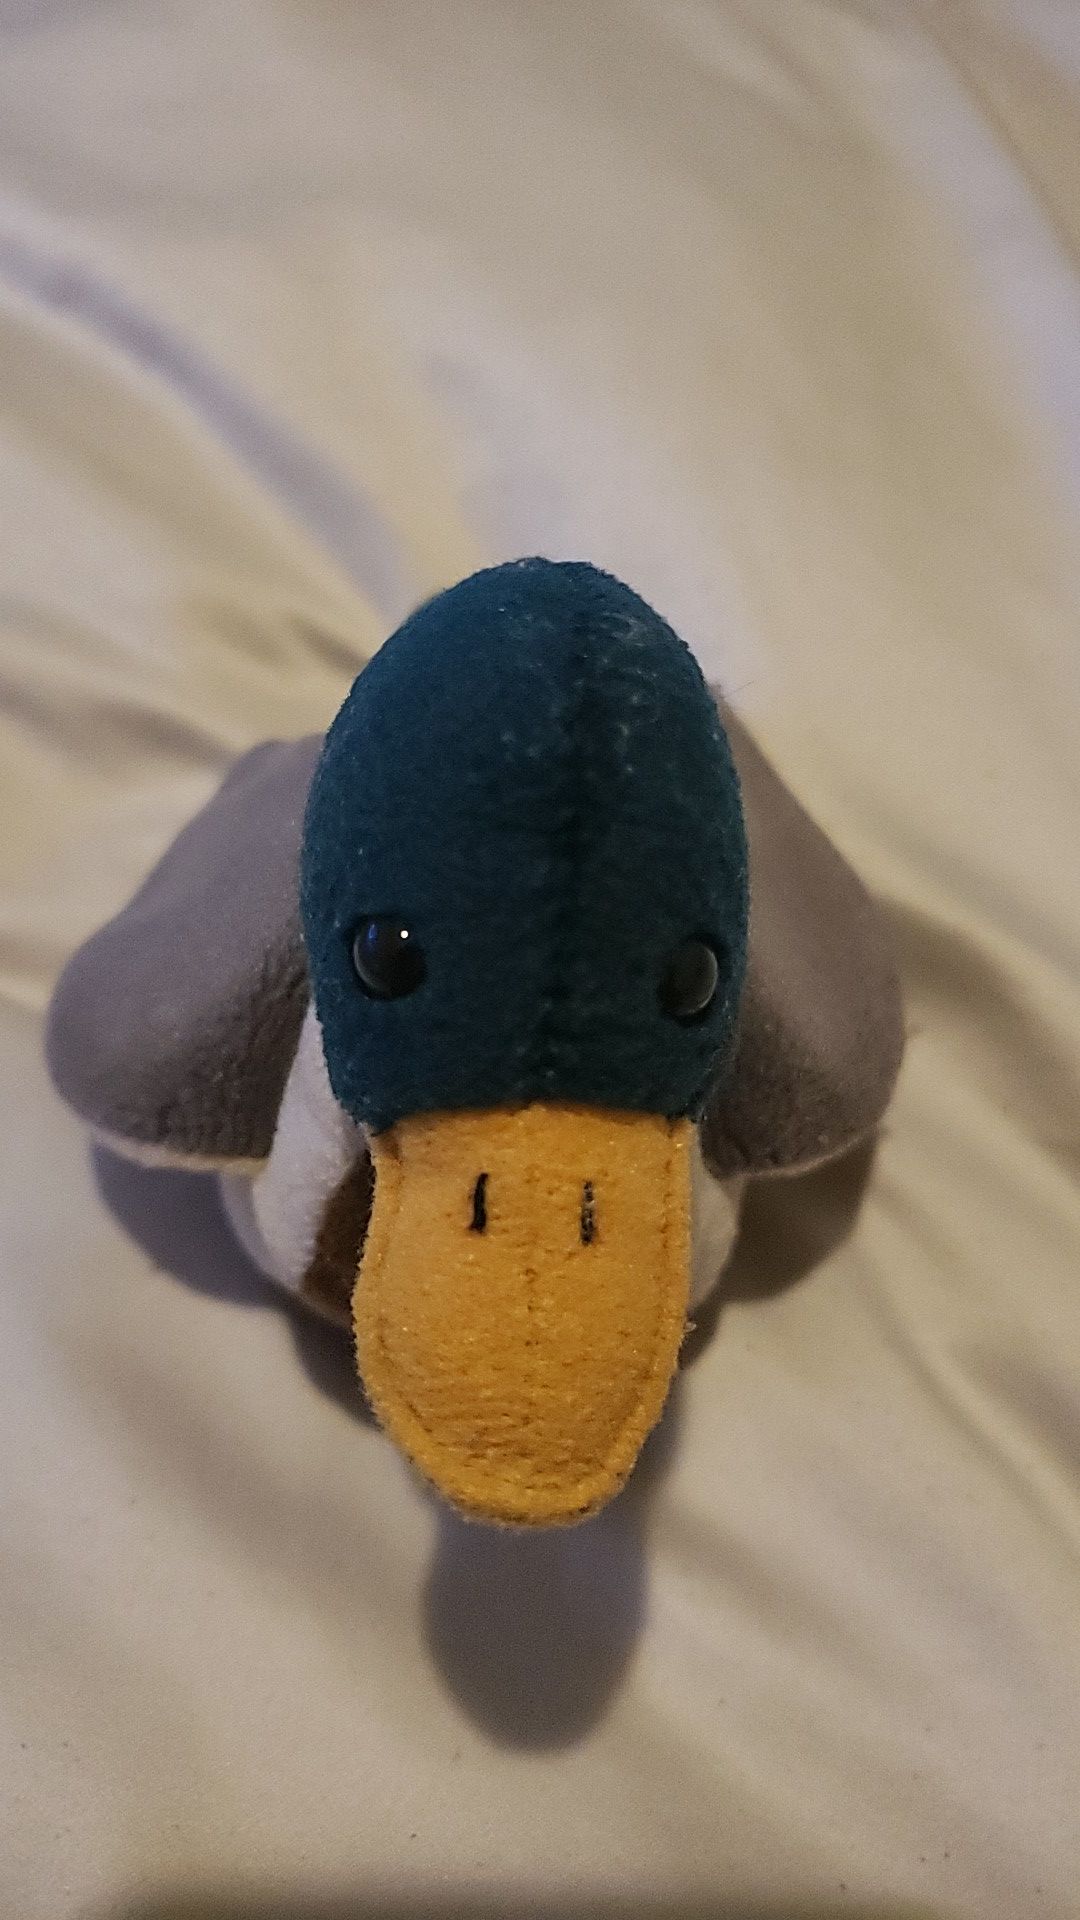 Jake the mallard duck beanie baby (no tag) faded. Make me an offer.